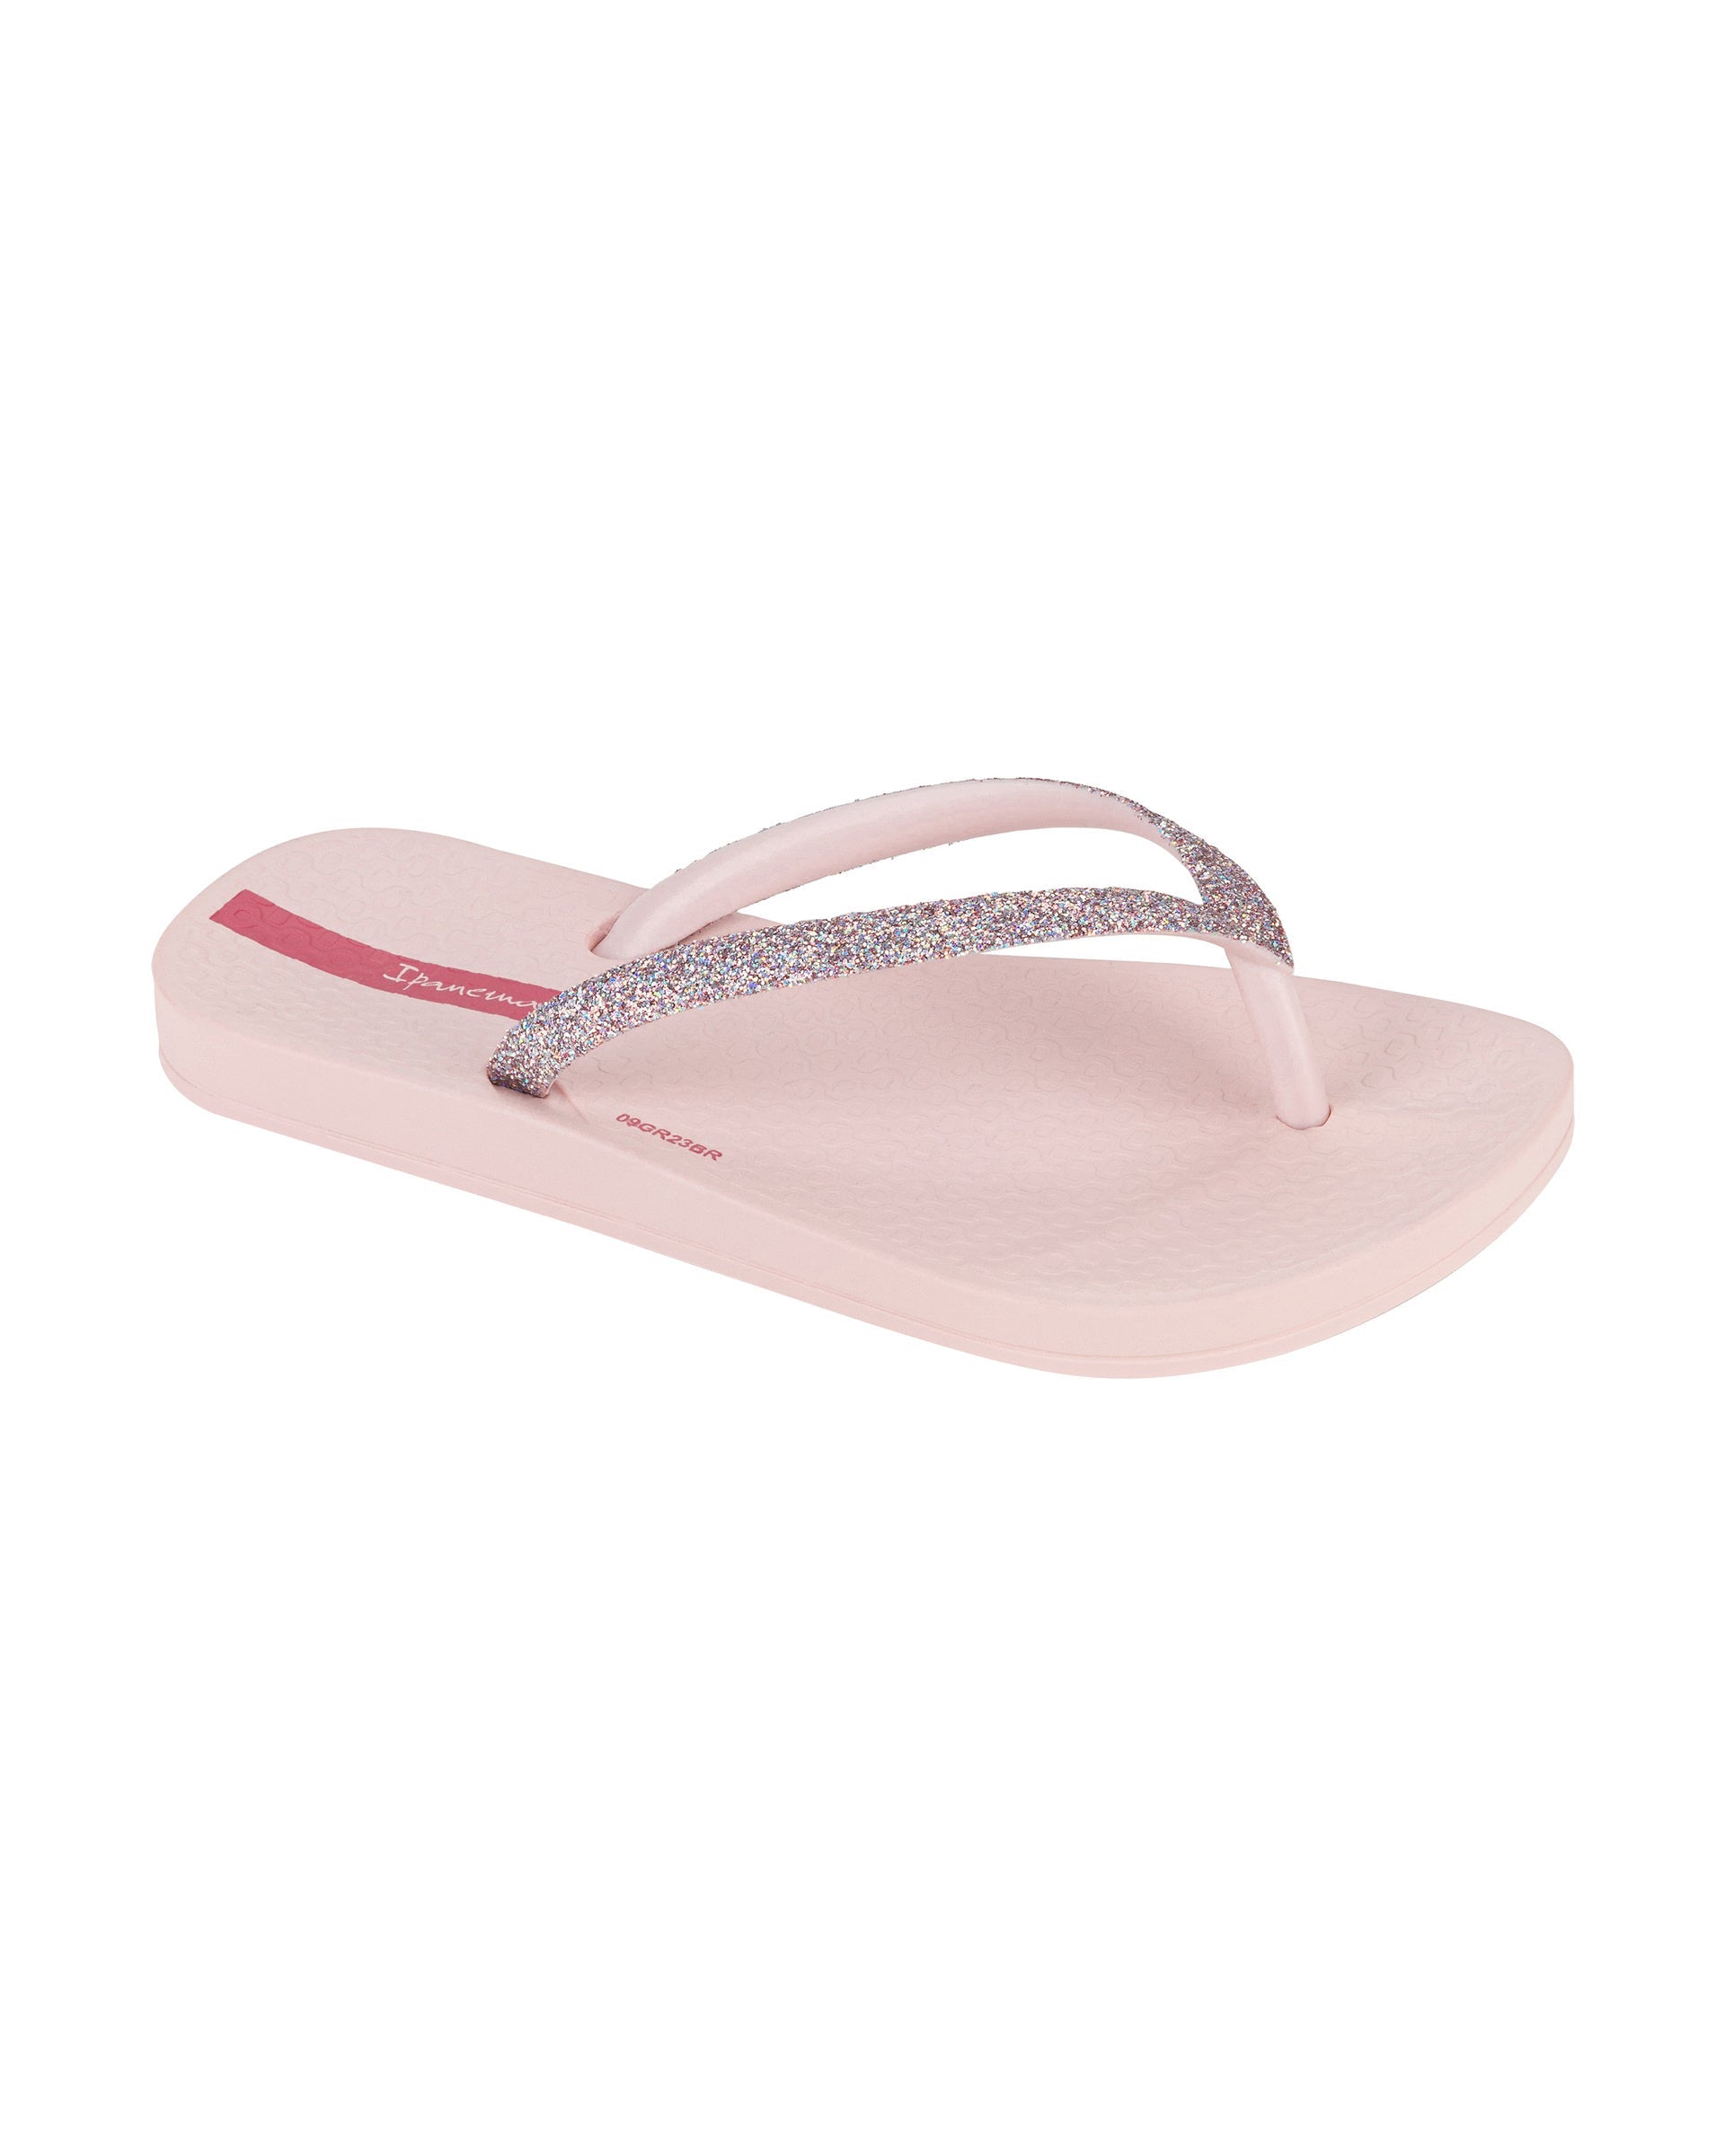 Angled view of a pink Ipanema Ana Sparkle kids flip flop with multicolor glitter strap.